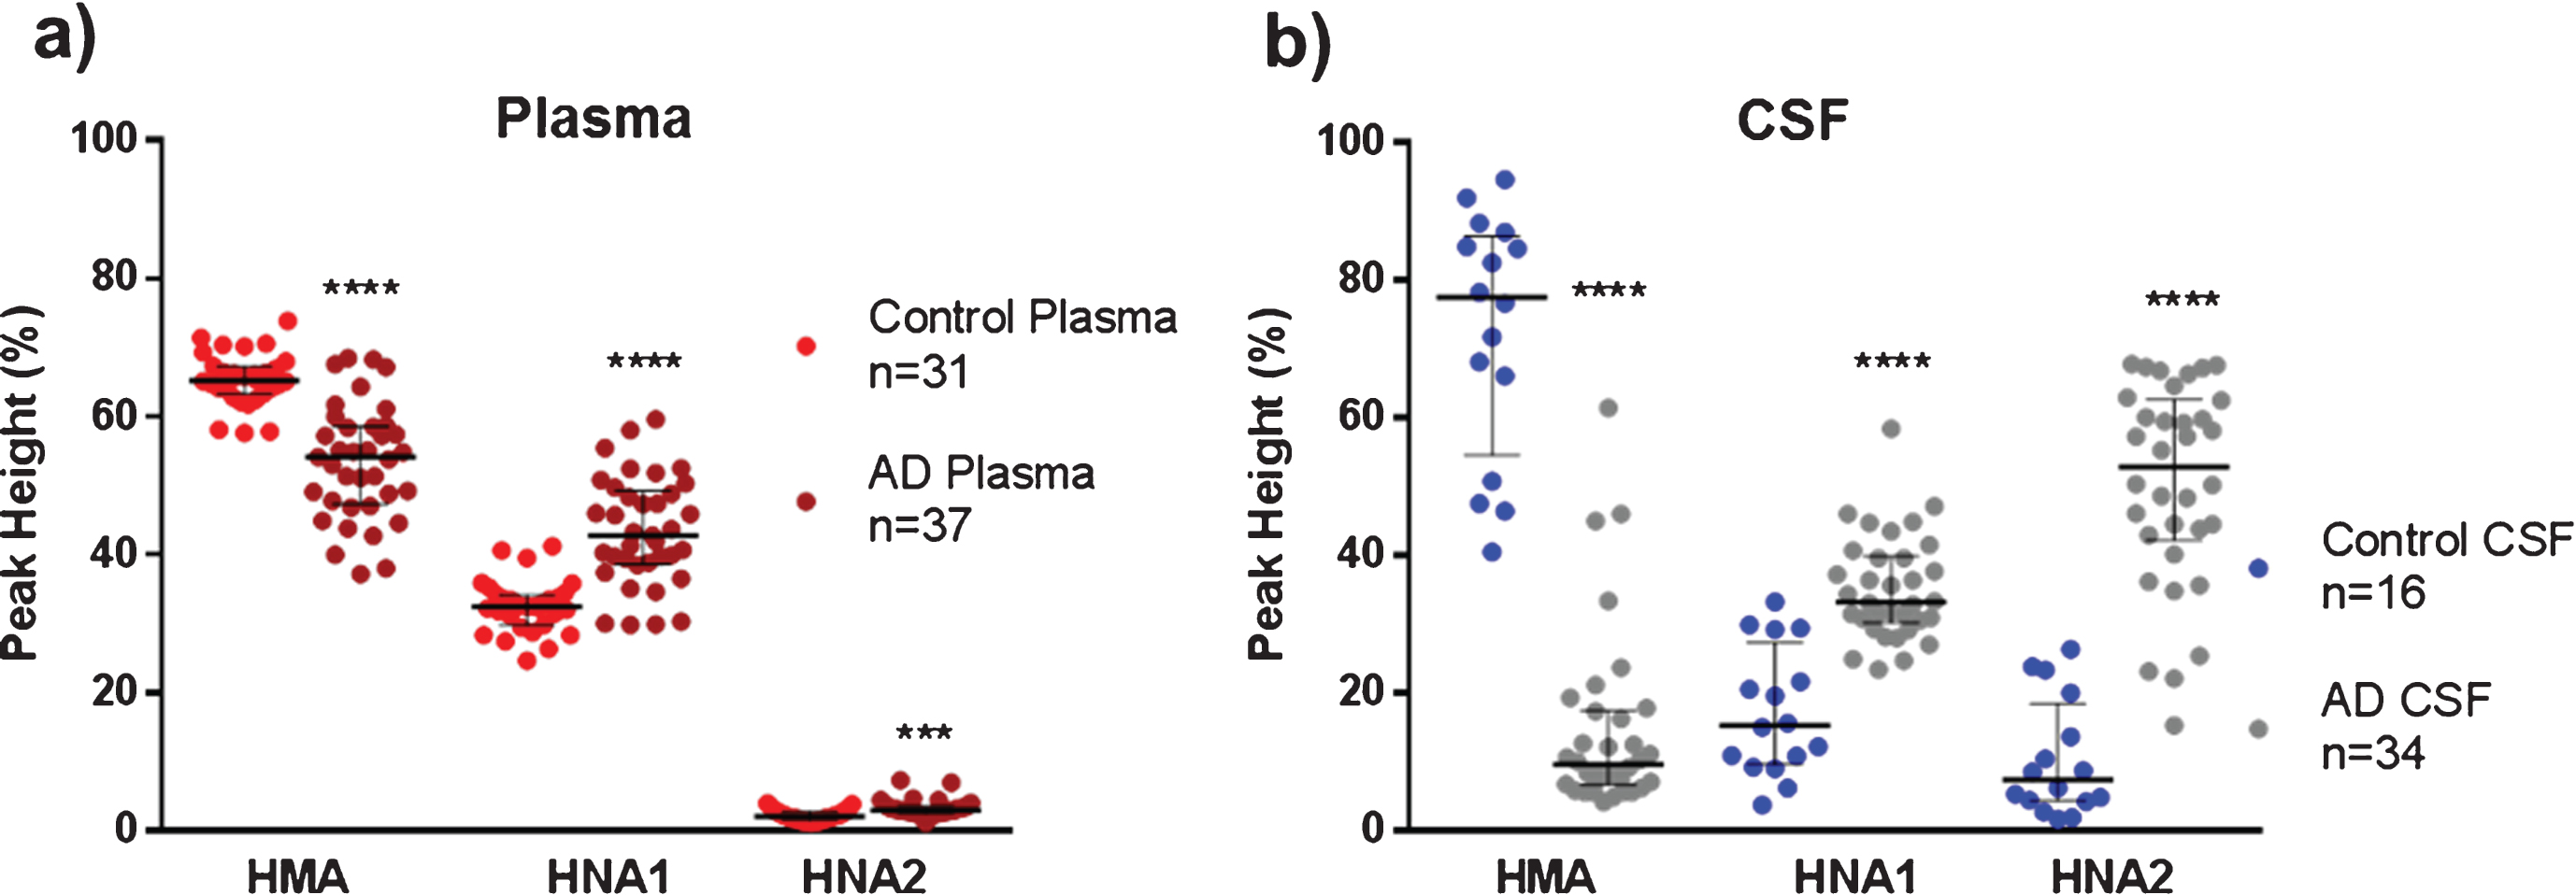 Albumin oxidation in plasma and cerebrospinal fluid (CSF) from controls (healthy age-matched donors) and Alzheimer’s disease (AD) patients. The subfigures show HPLC analysis of the reduced albumin form HMA, the reversible oxidized form HNA1 and the irreversible oxidized form HNA2 in plasma (a) and CSF (b) samples. Data are shown as median±interquartile range. Unpaired t test ( ***p < 0.001;  ****p < 0.0001; AD versus control).